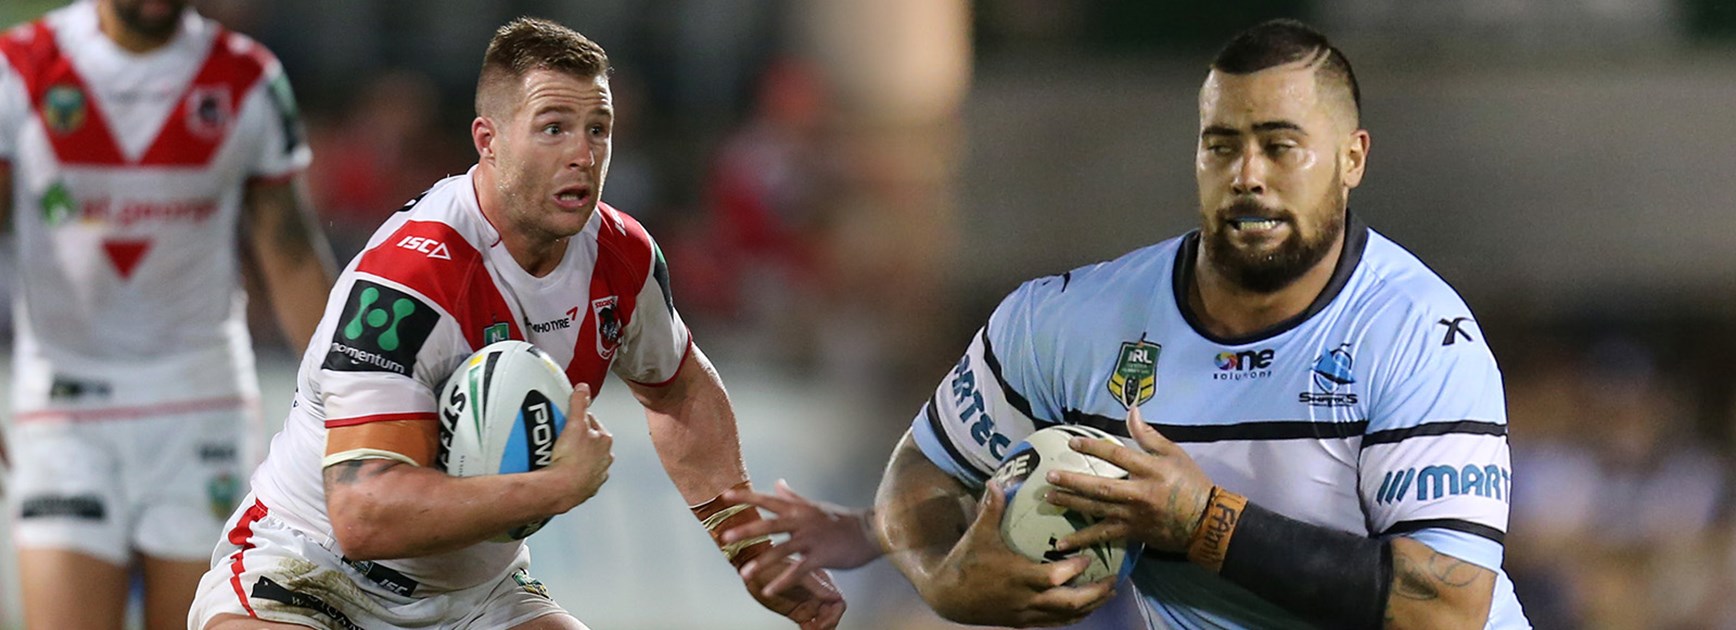 Once were brothers: NSW forwards Trent Merrin and Andrew Fifita will clash in the local derby.